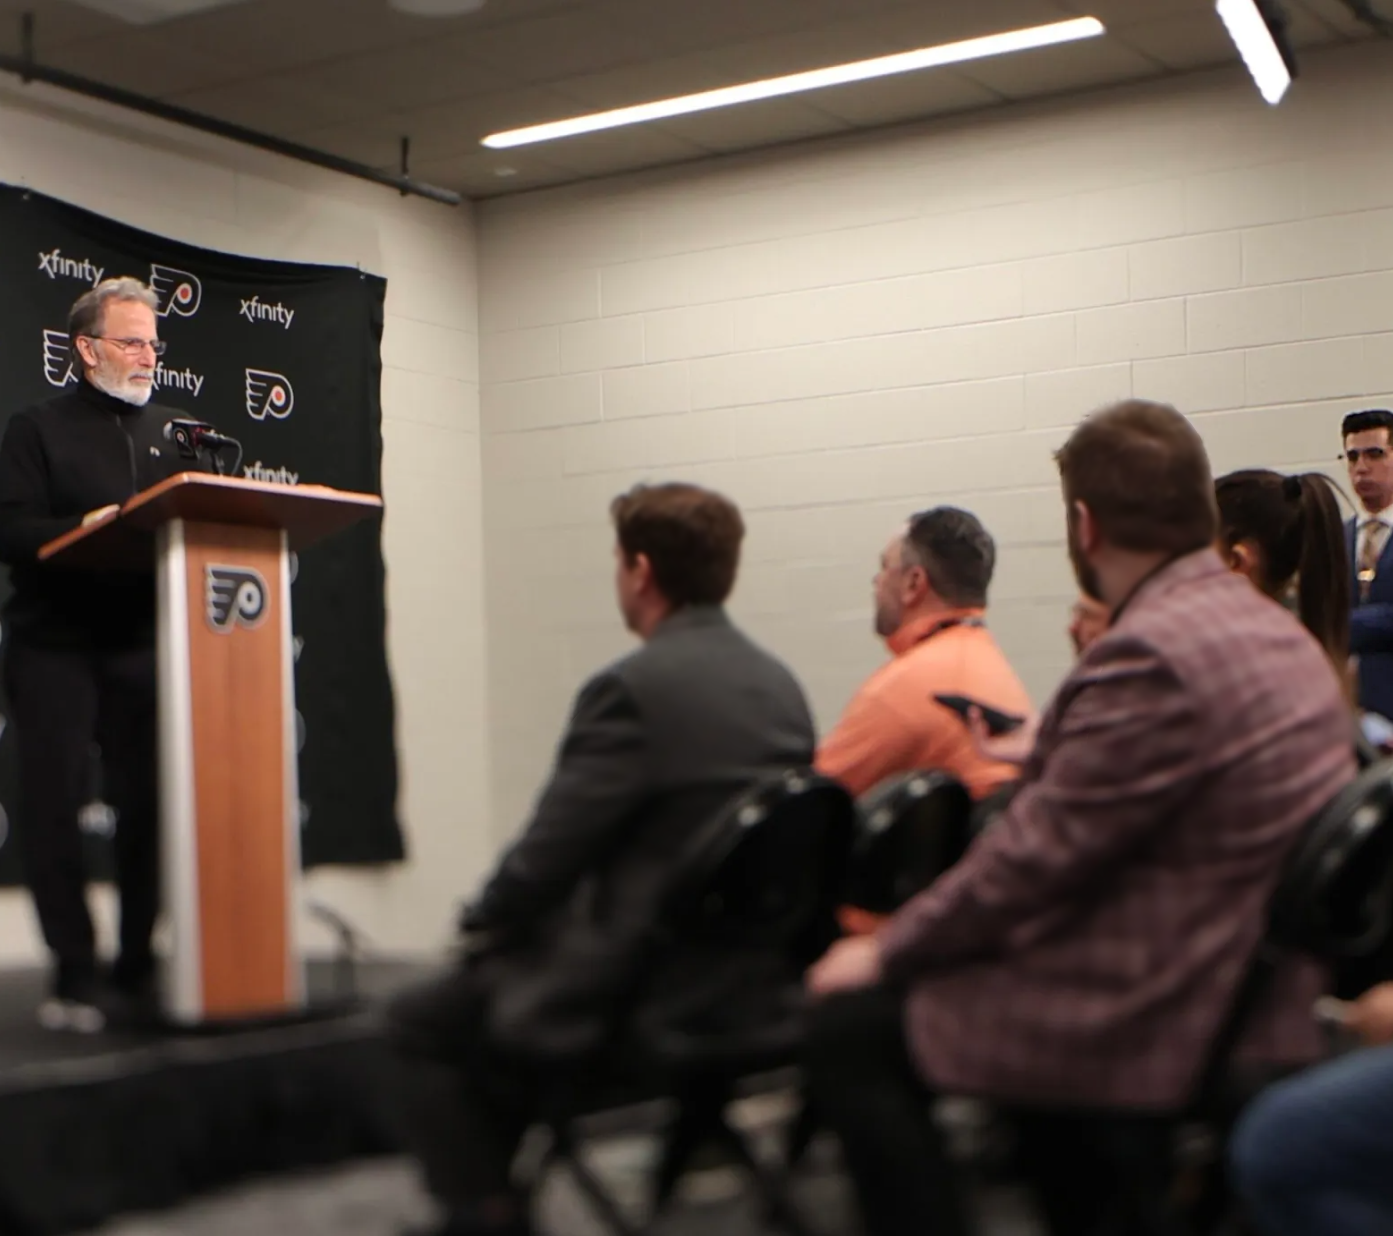 Cody, a white male in a white shirt and dark jacket, stands off to the right side of Head Coach John Tortorella's postgame media availability in the Zack Hill Media Room located at Wells Fargo Center in Philadelphia, Pennsylvania.